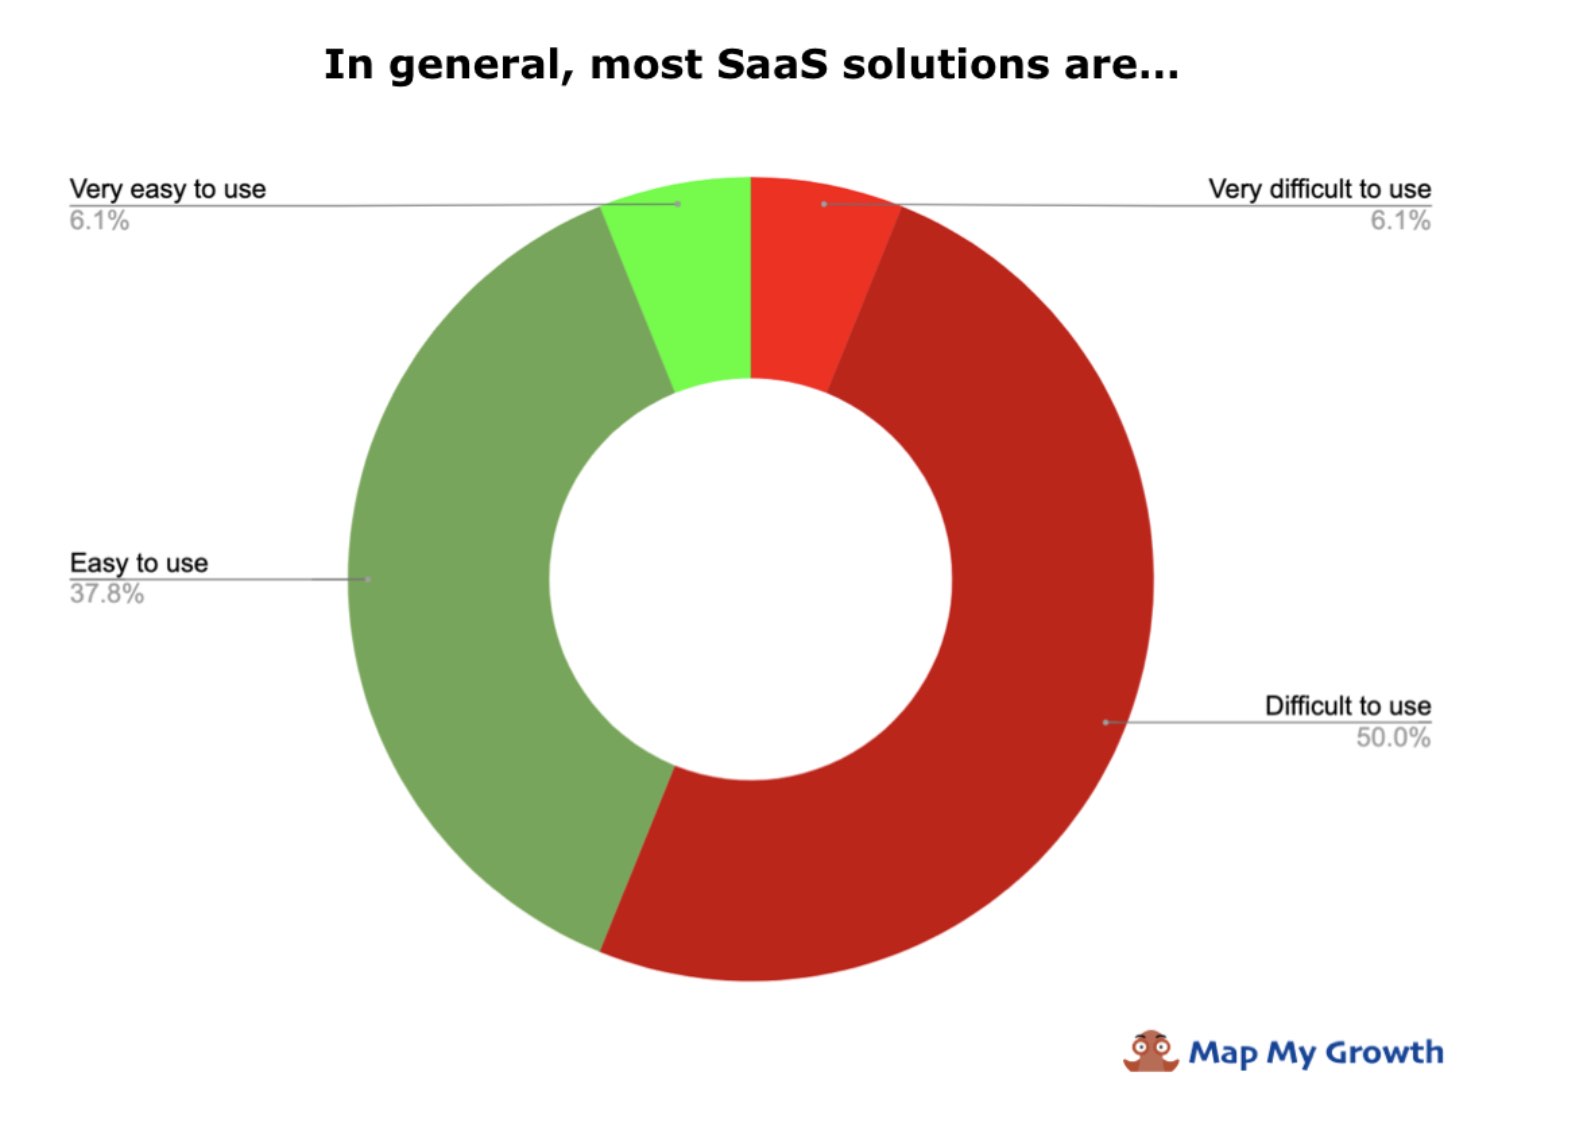 In general, most Saas solutions are